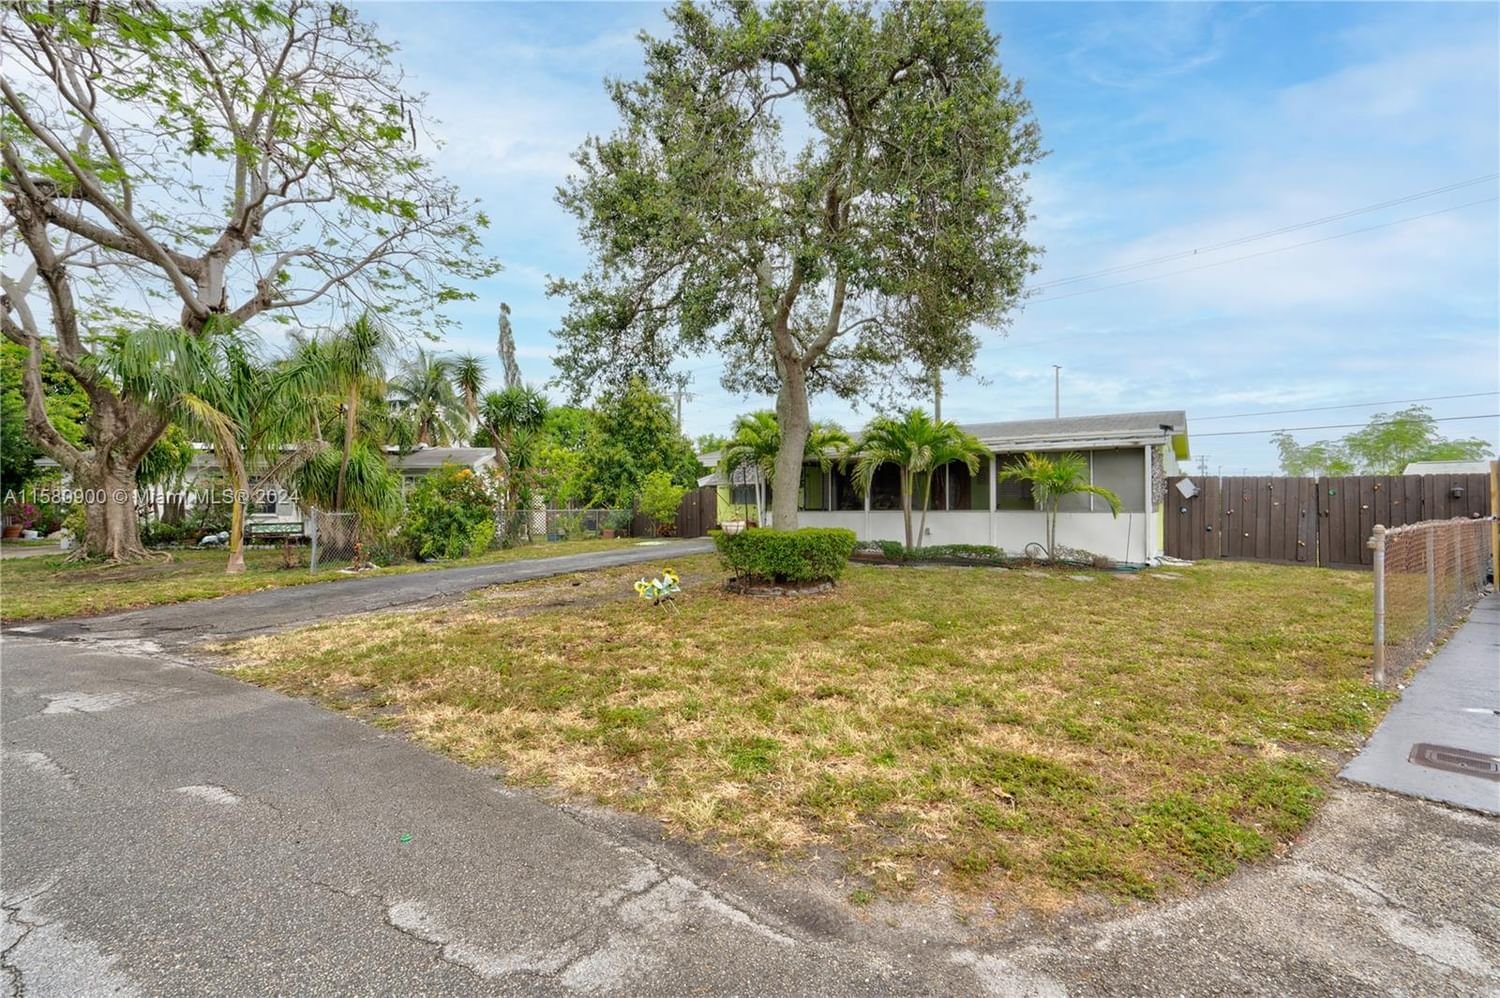 Real estate property located at 613 61st Ave, Broward County, BREEZE HAVEN, Hollywood, FL